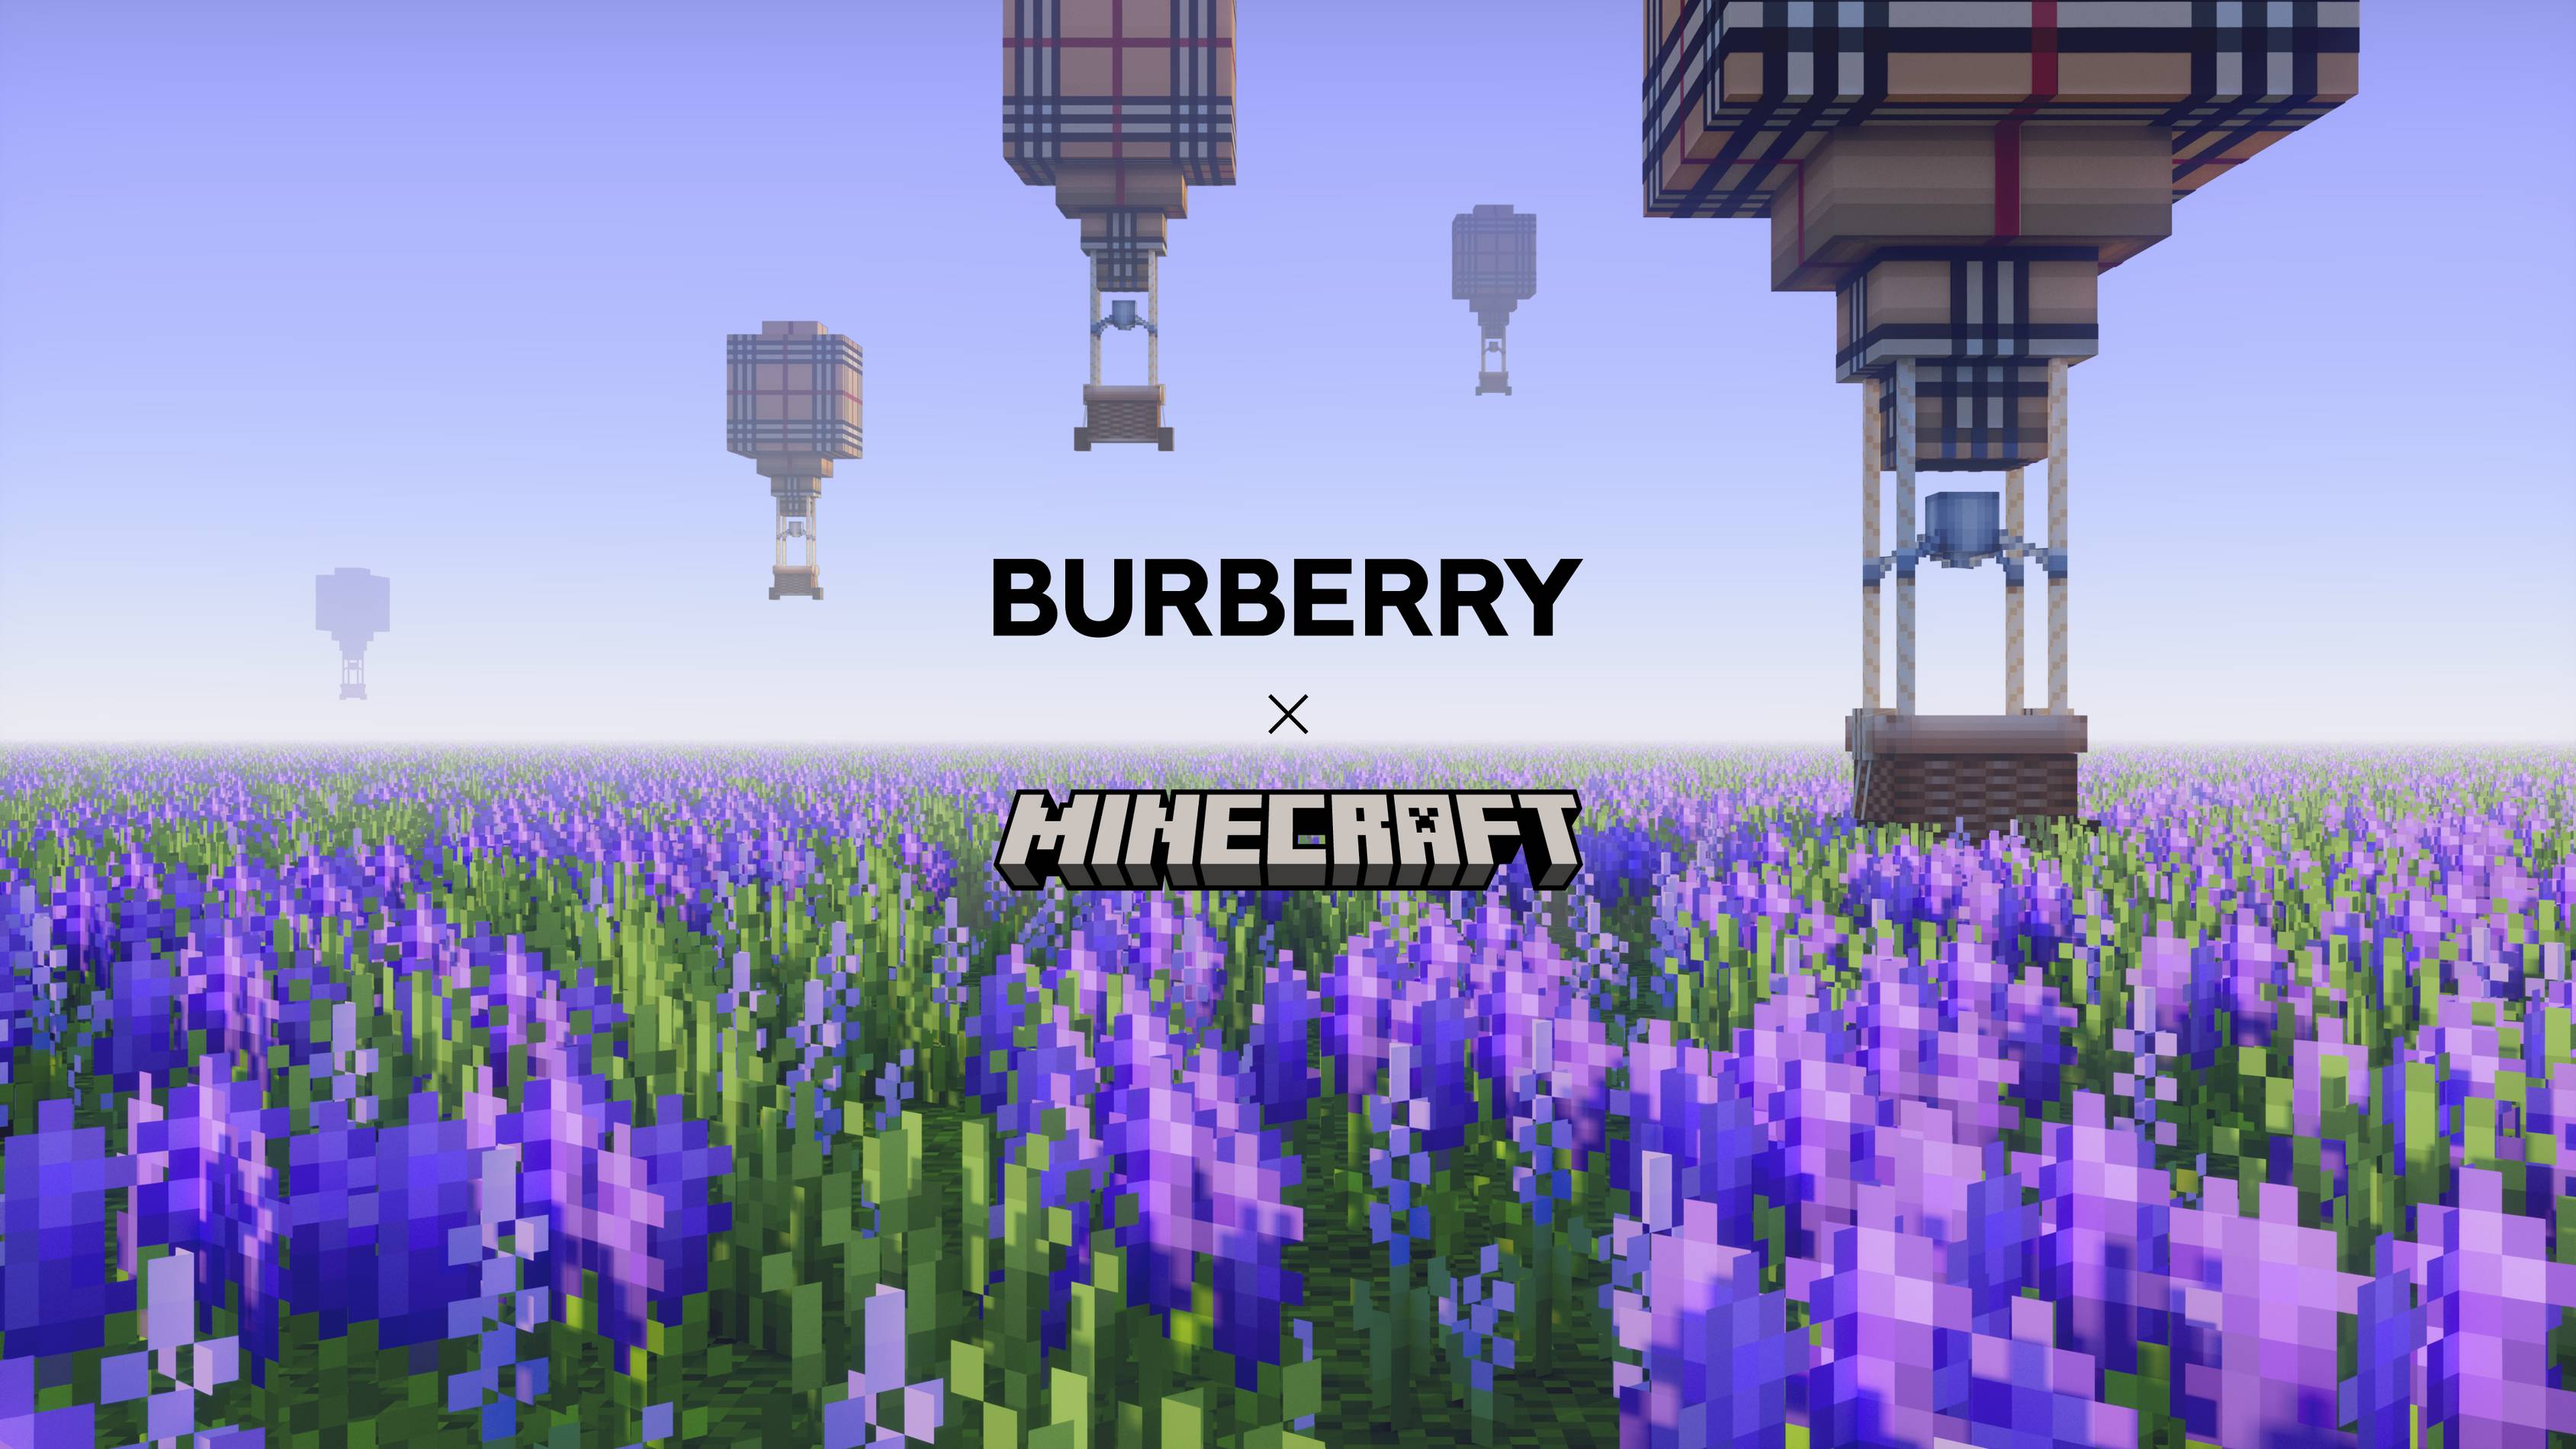 pixelated burberry hot air balloons soaring over a minecraft landscape